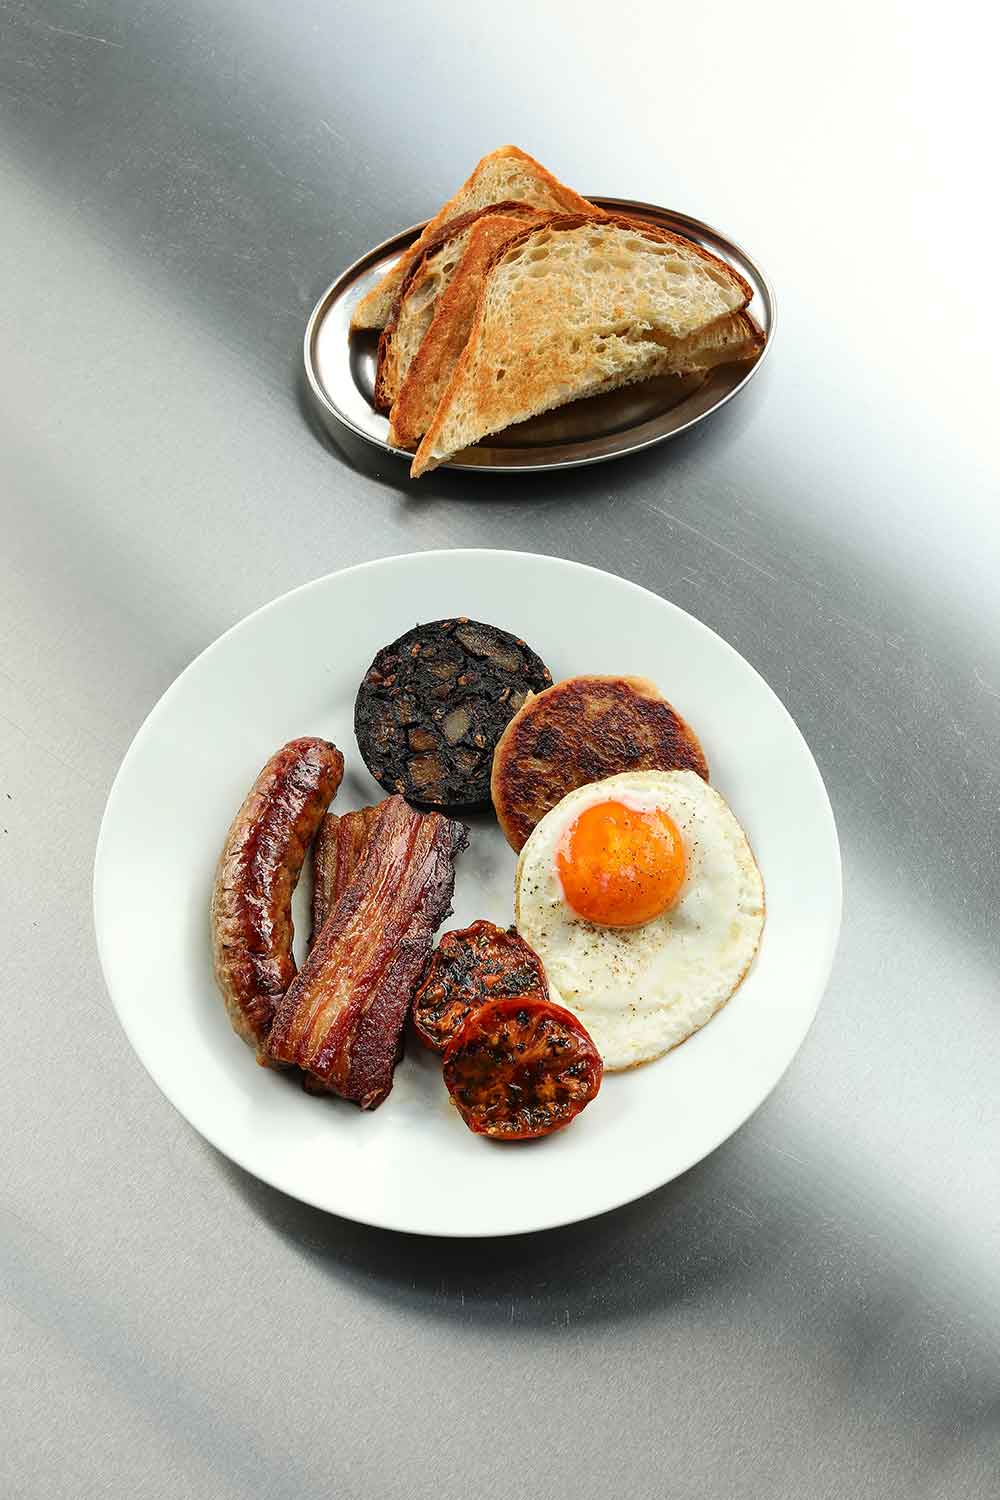 Full Irish with hand-cut belly bacon, traditional black and white pudding, eggs and toast at INIS, a new eatery opening in Hackney Wick